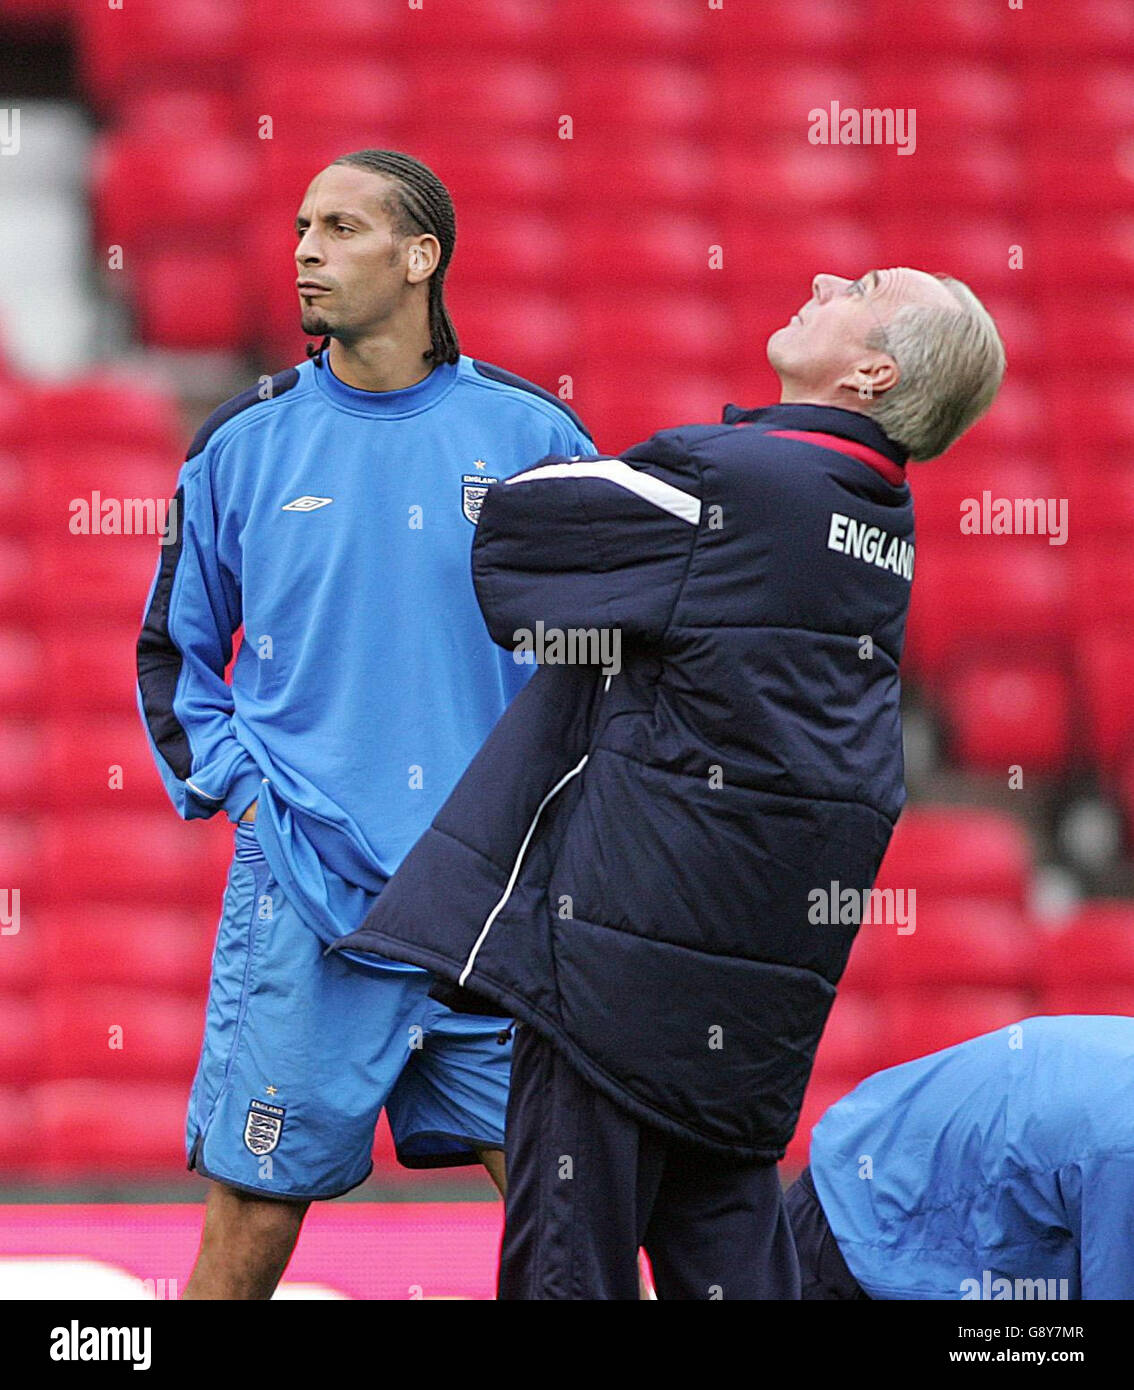 Toestemming Definitie Vervolgen England's head coach Sven Goran Eriksson (L) with Rio Ferdinand (L) during  a training session at Old Trafford, Manchester, Friday October 7, 2005.  England play Austria in a World Cup qualifier at